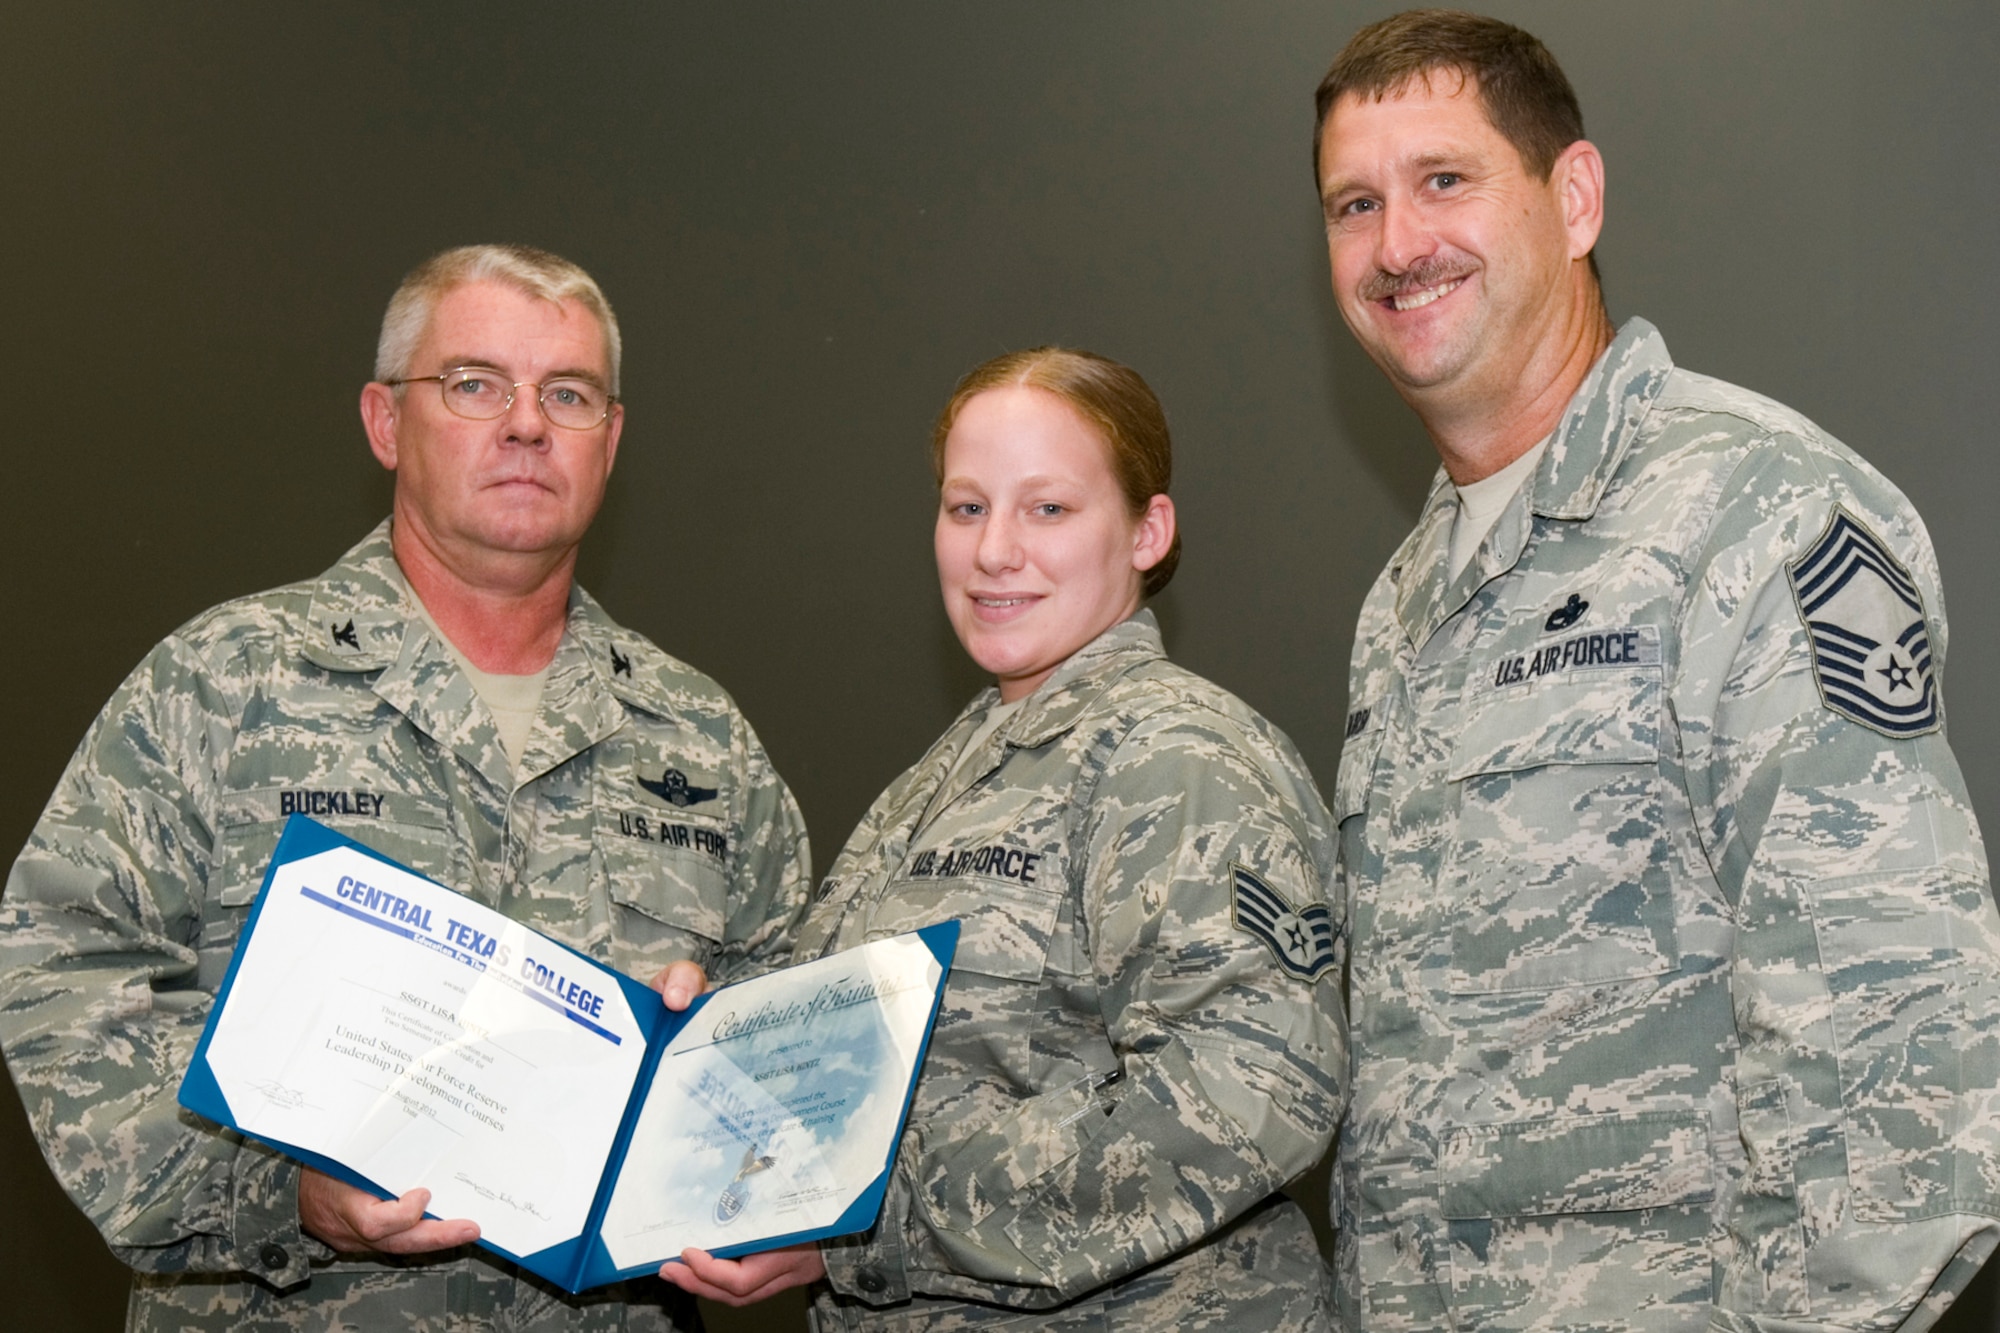 GRISSOM AIR RESERVE BASE, Ind. -- Staff Sgt. Lisa Hintz, 434th Logistics Readiness Squadron supply management journeyman, receives a certificate of training from Col. Don Buckley, 434th Air Refueling Wing commander, and Chief Master Sergeant James Burba, 434th Maintenance Operations Flight maintenance superintendent, at a graduation ceremony for a Non-Commissioned Officer Leadership Development Course here Aug. 17. Hintz graduated the course with 20 other NCOs. (U.S. Air Force photo/Senior Airman Andrew McLaughlin)